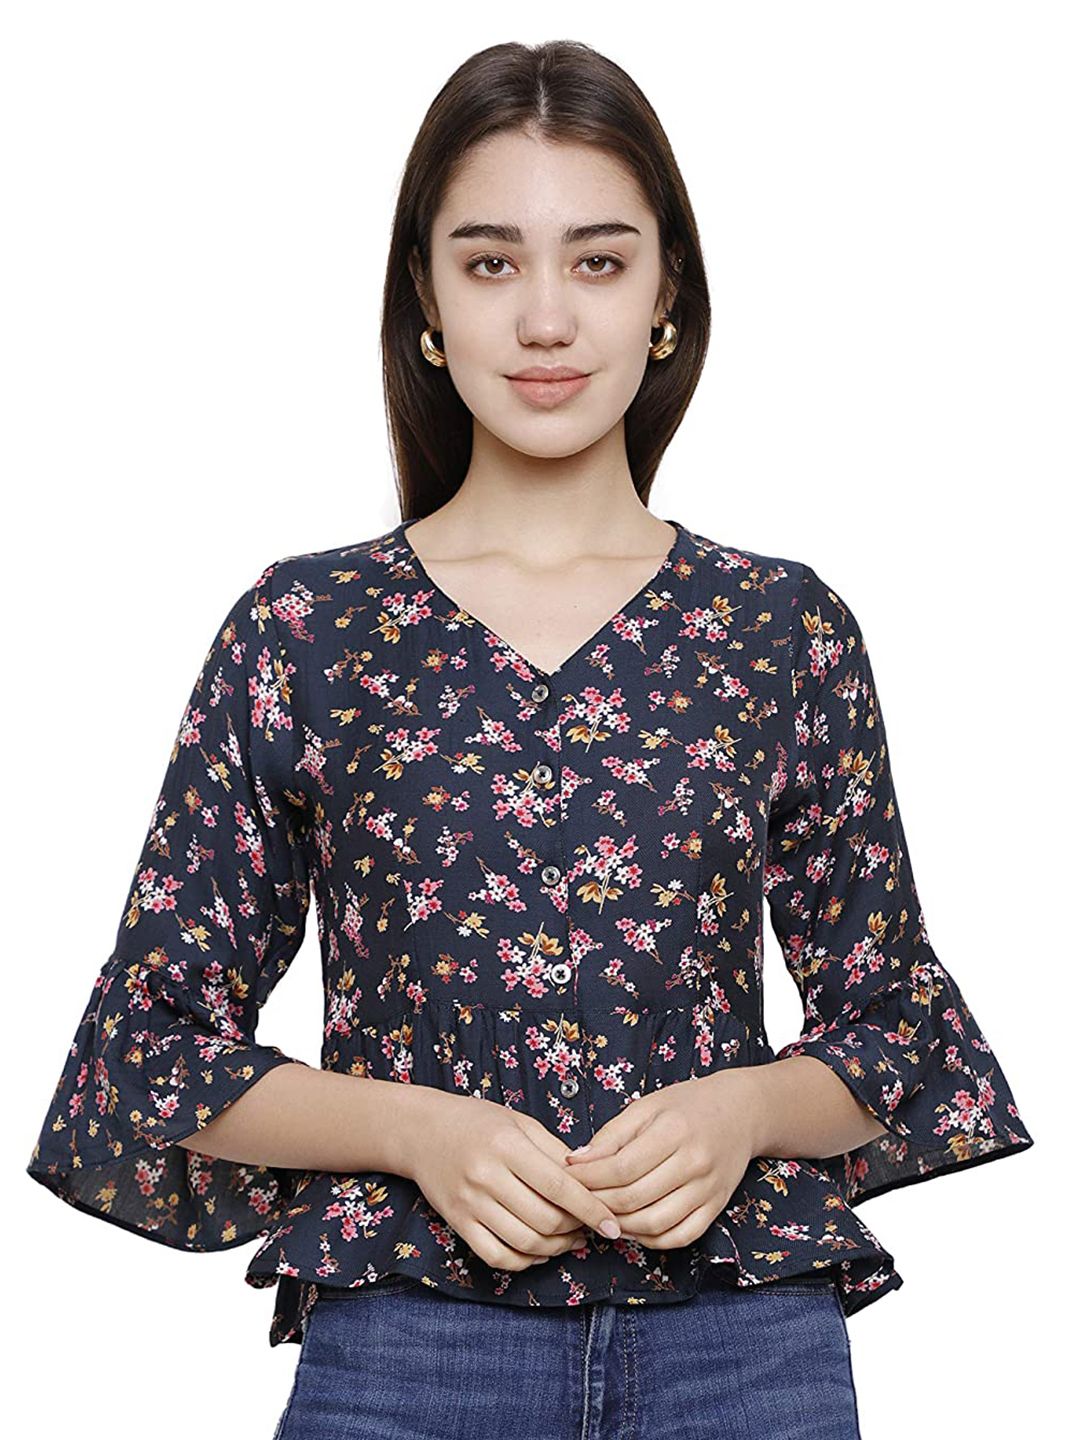 DECHEN Women Navy Blue Floral Print Bell Sleeves Top Price in India